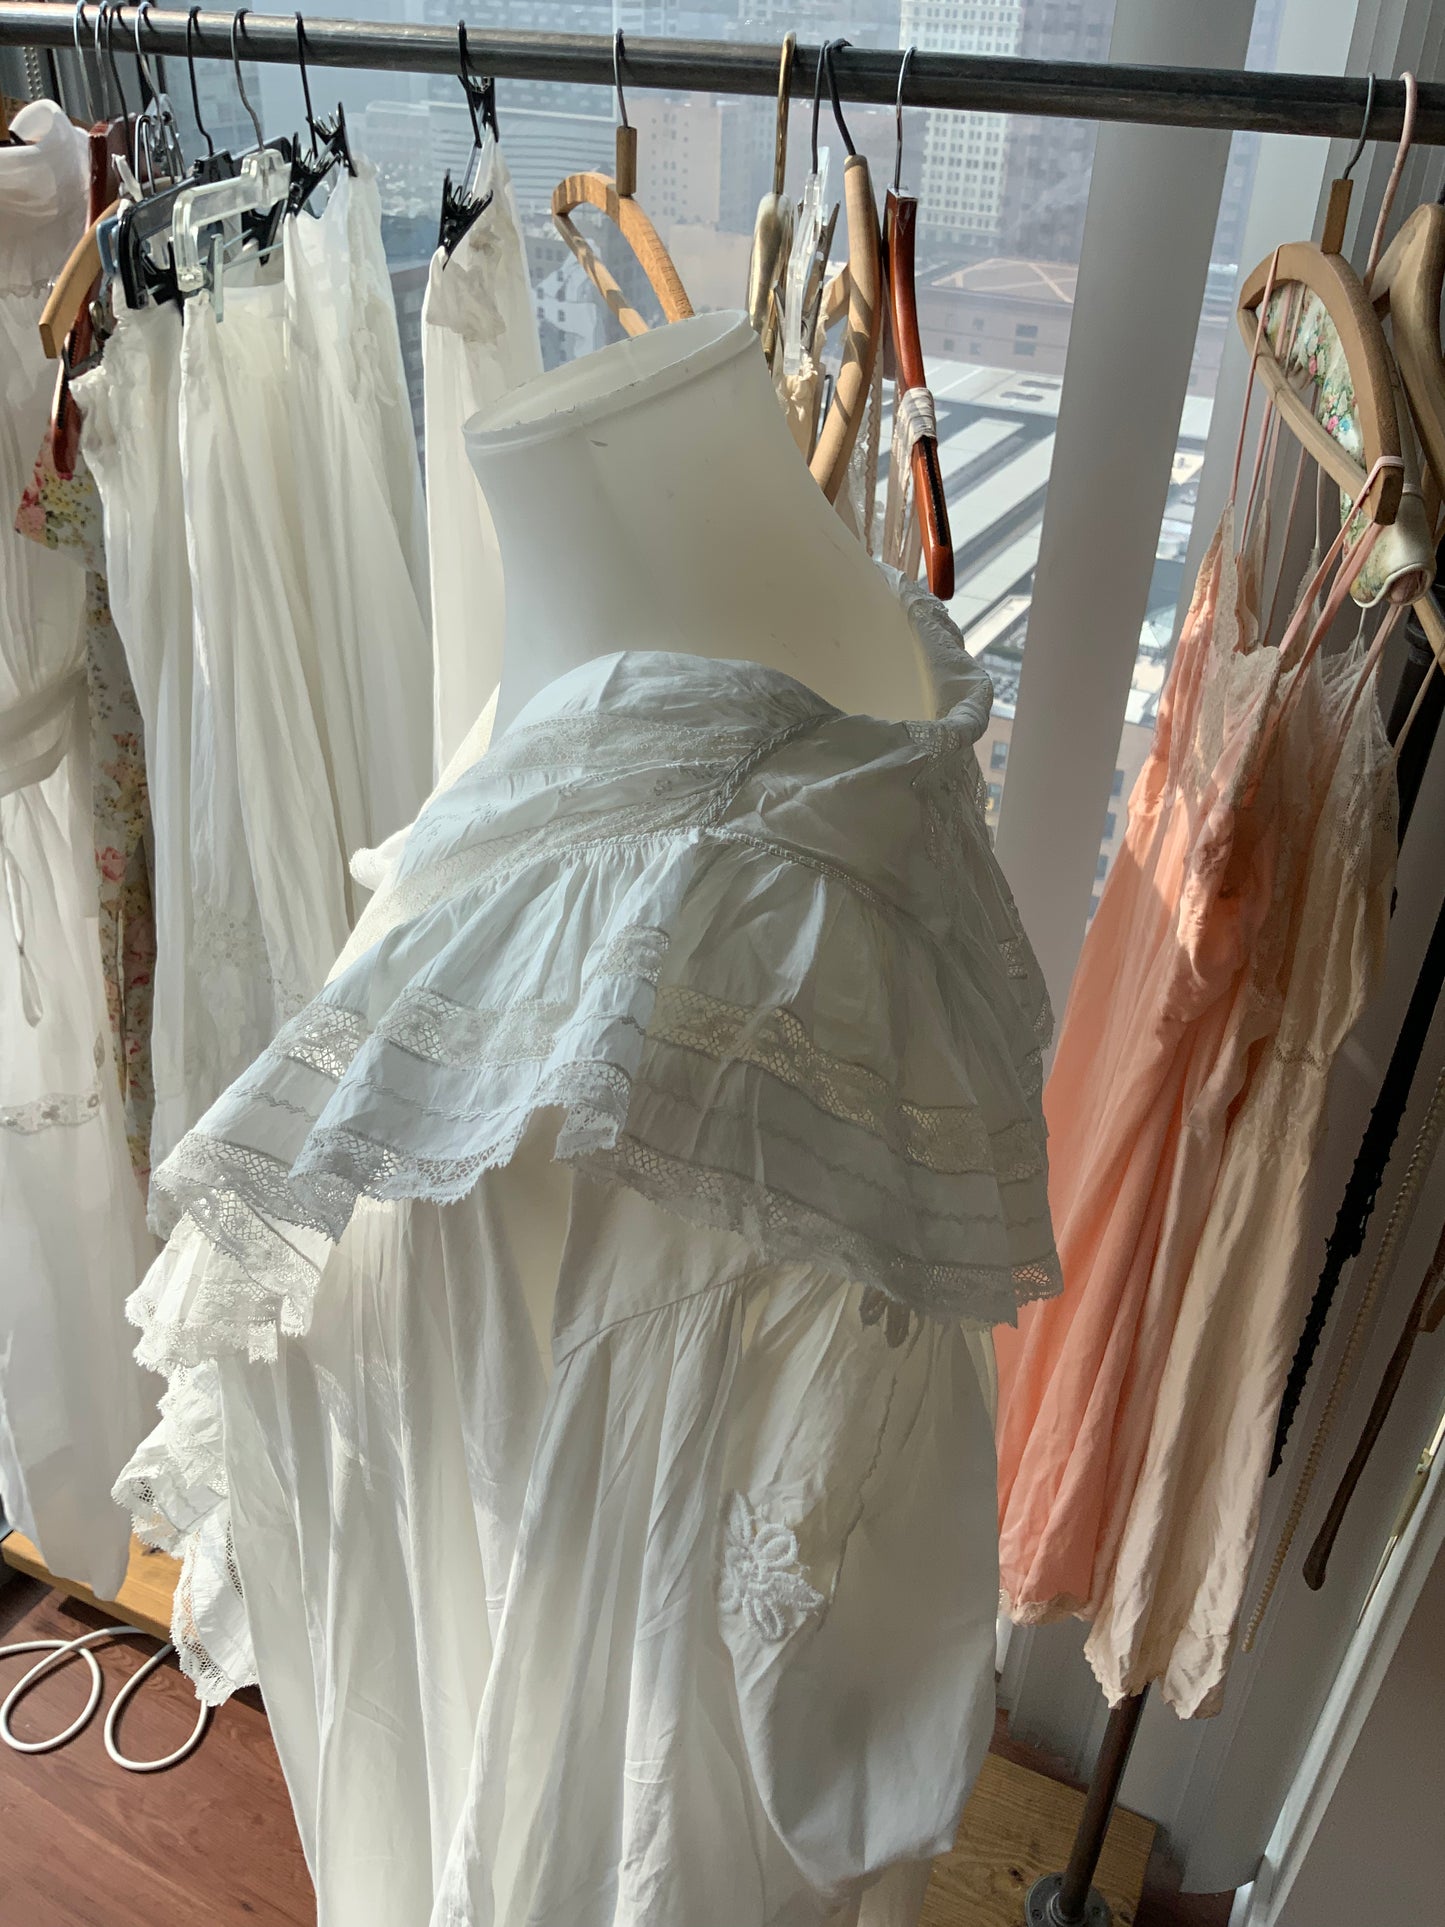 Antique Ruffled Nightgown